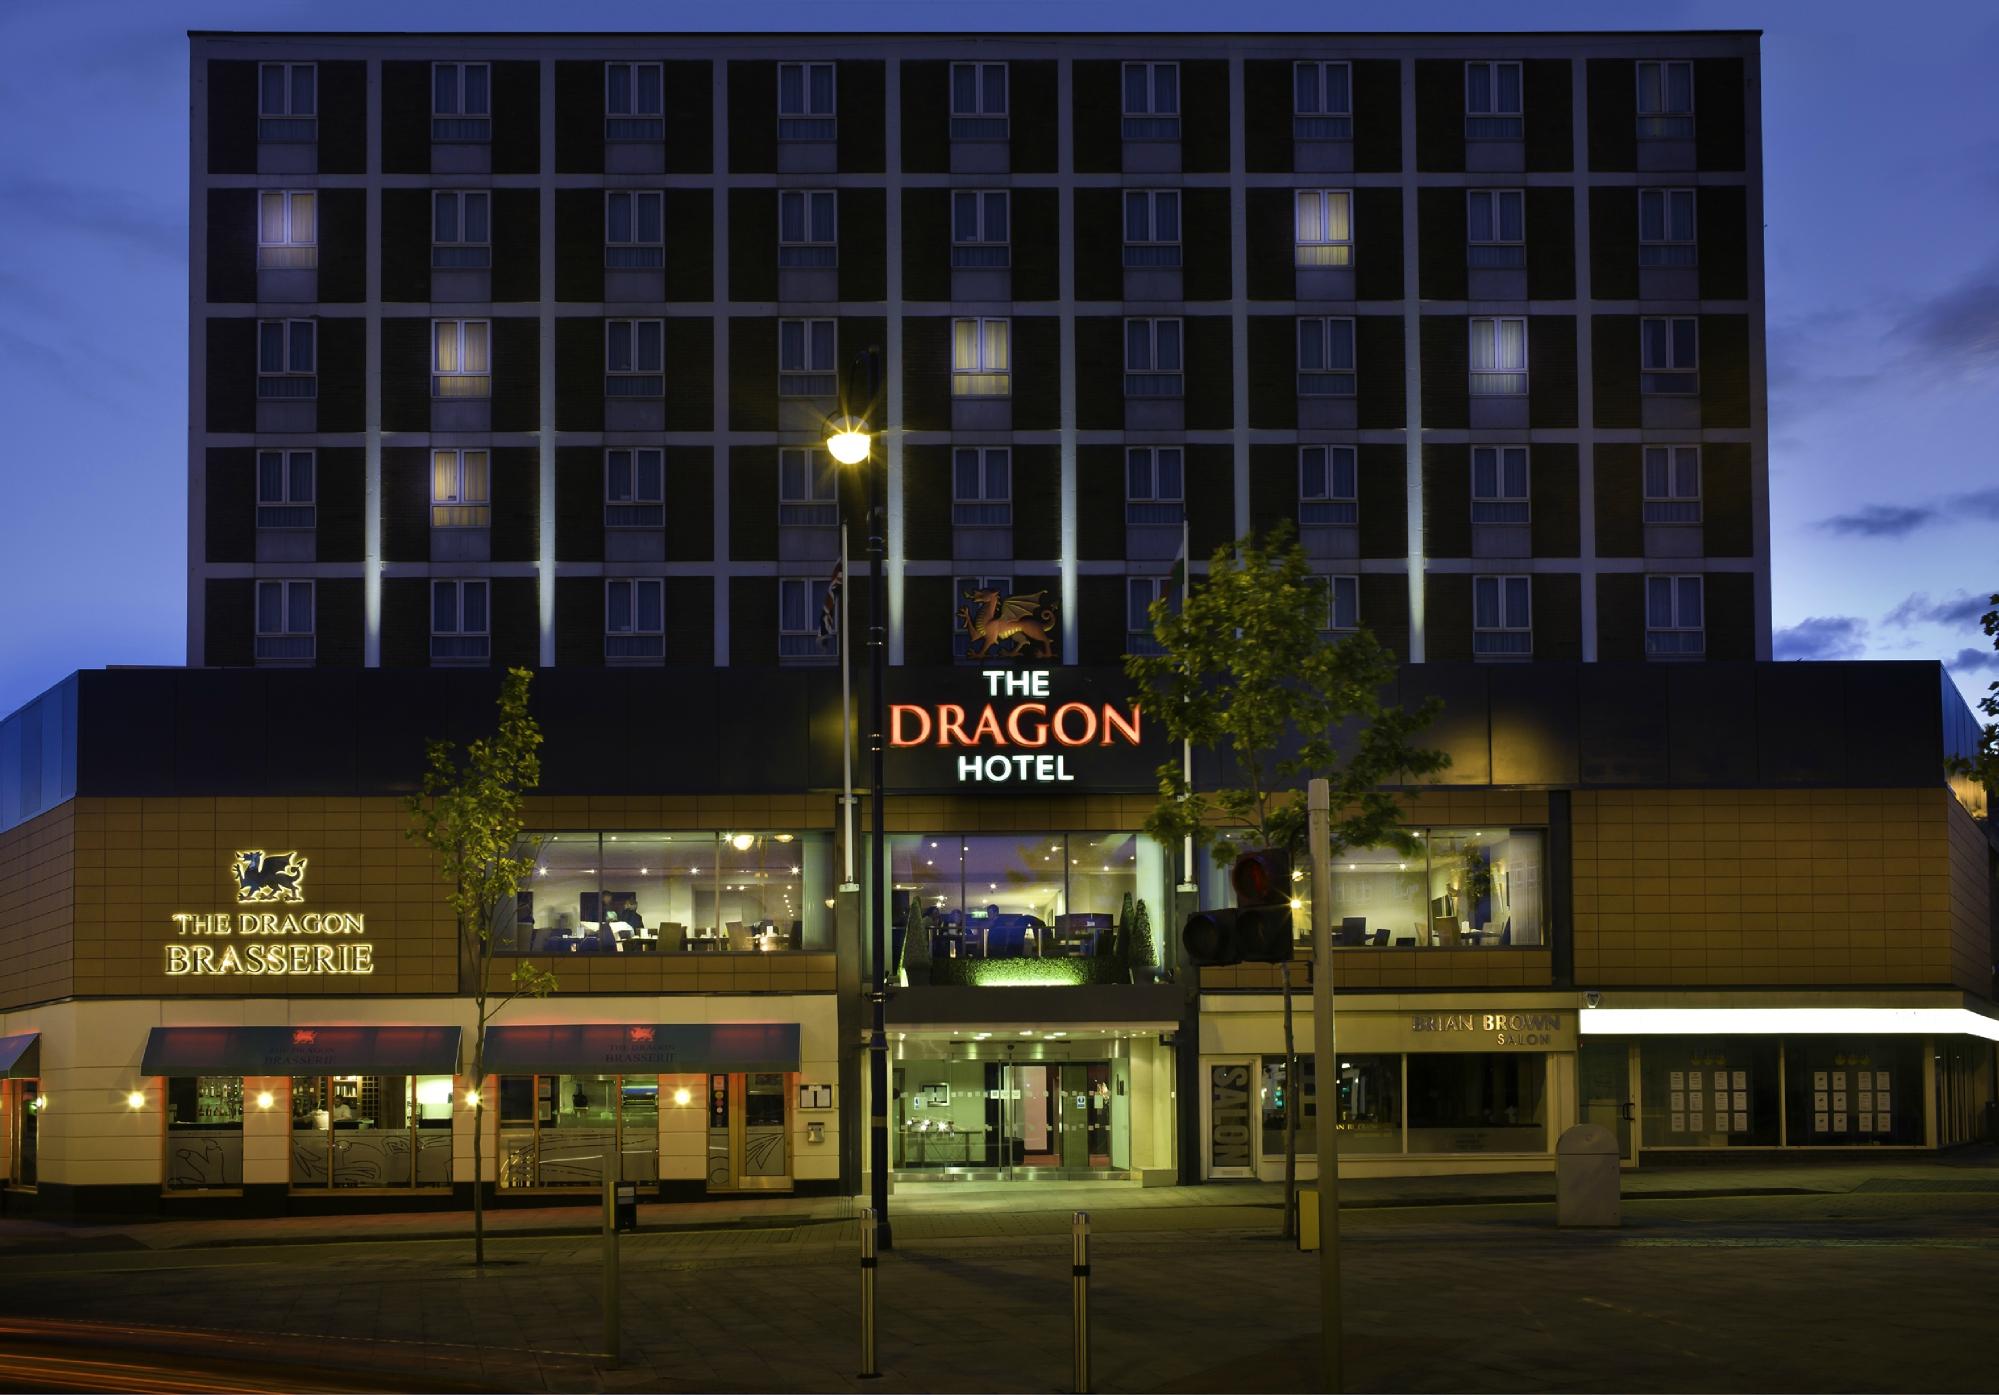 The Dragon Hotel UK Business Directory